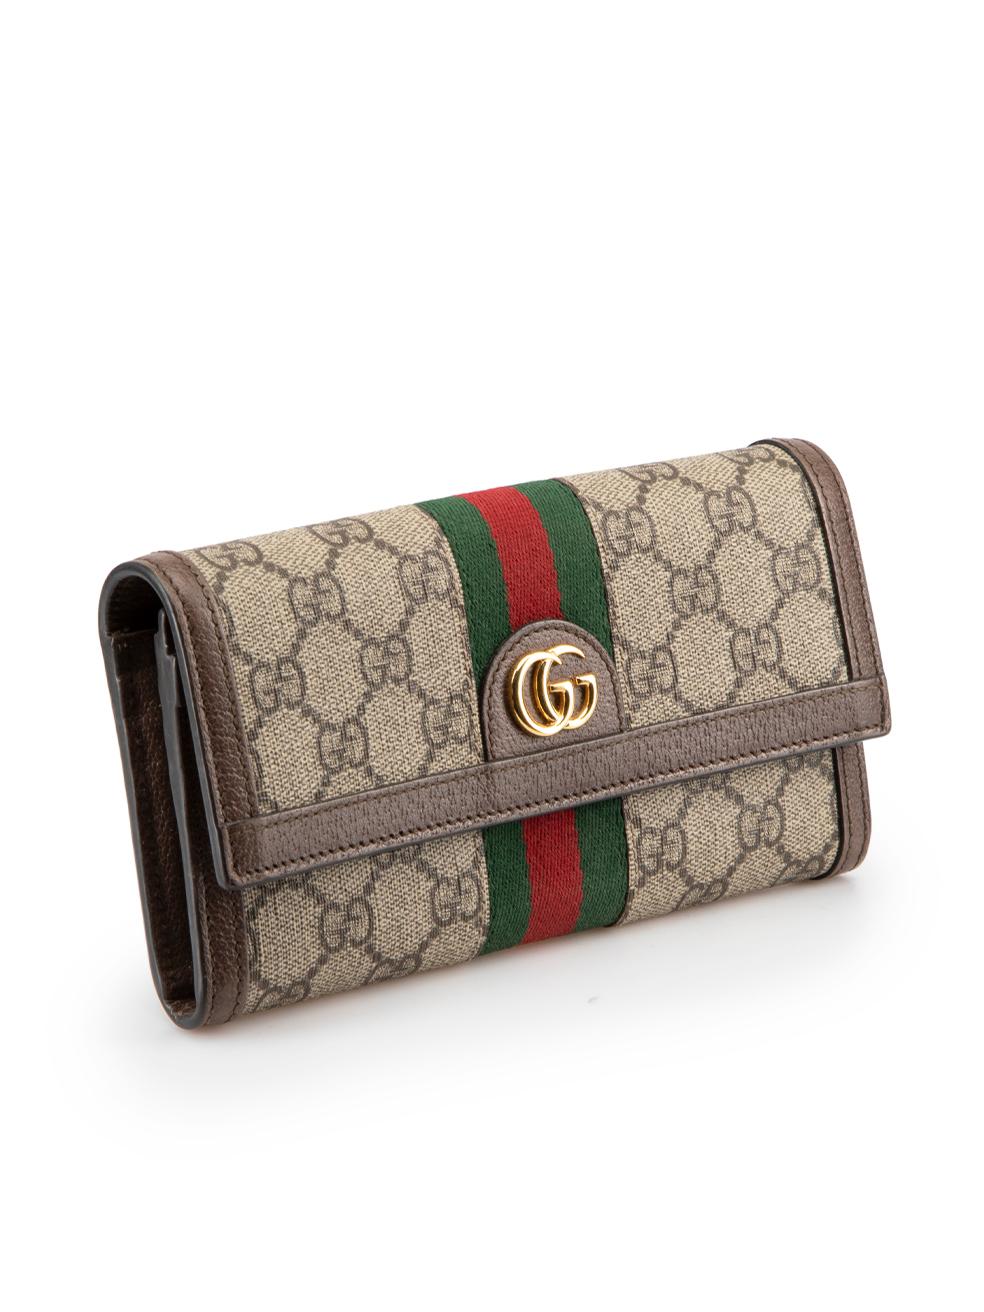 CONDITION is Very good. Minimal wear to wallet is evident. Minimal tarnishing to GG hardware and small pen mark on interior leather flap on this used Gucci designer resale item. Original dust bag and box included.

Details
Ophidia model
Brown
Coated